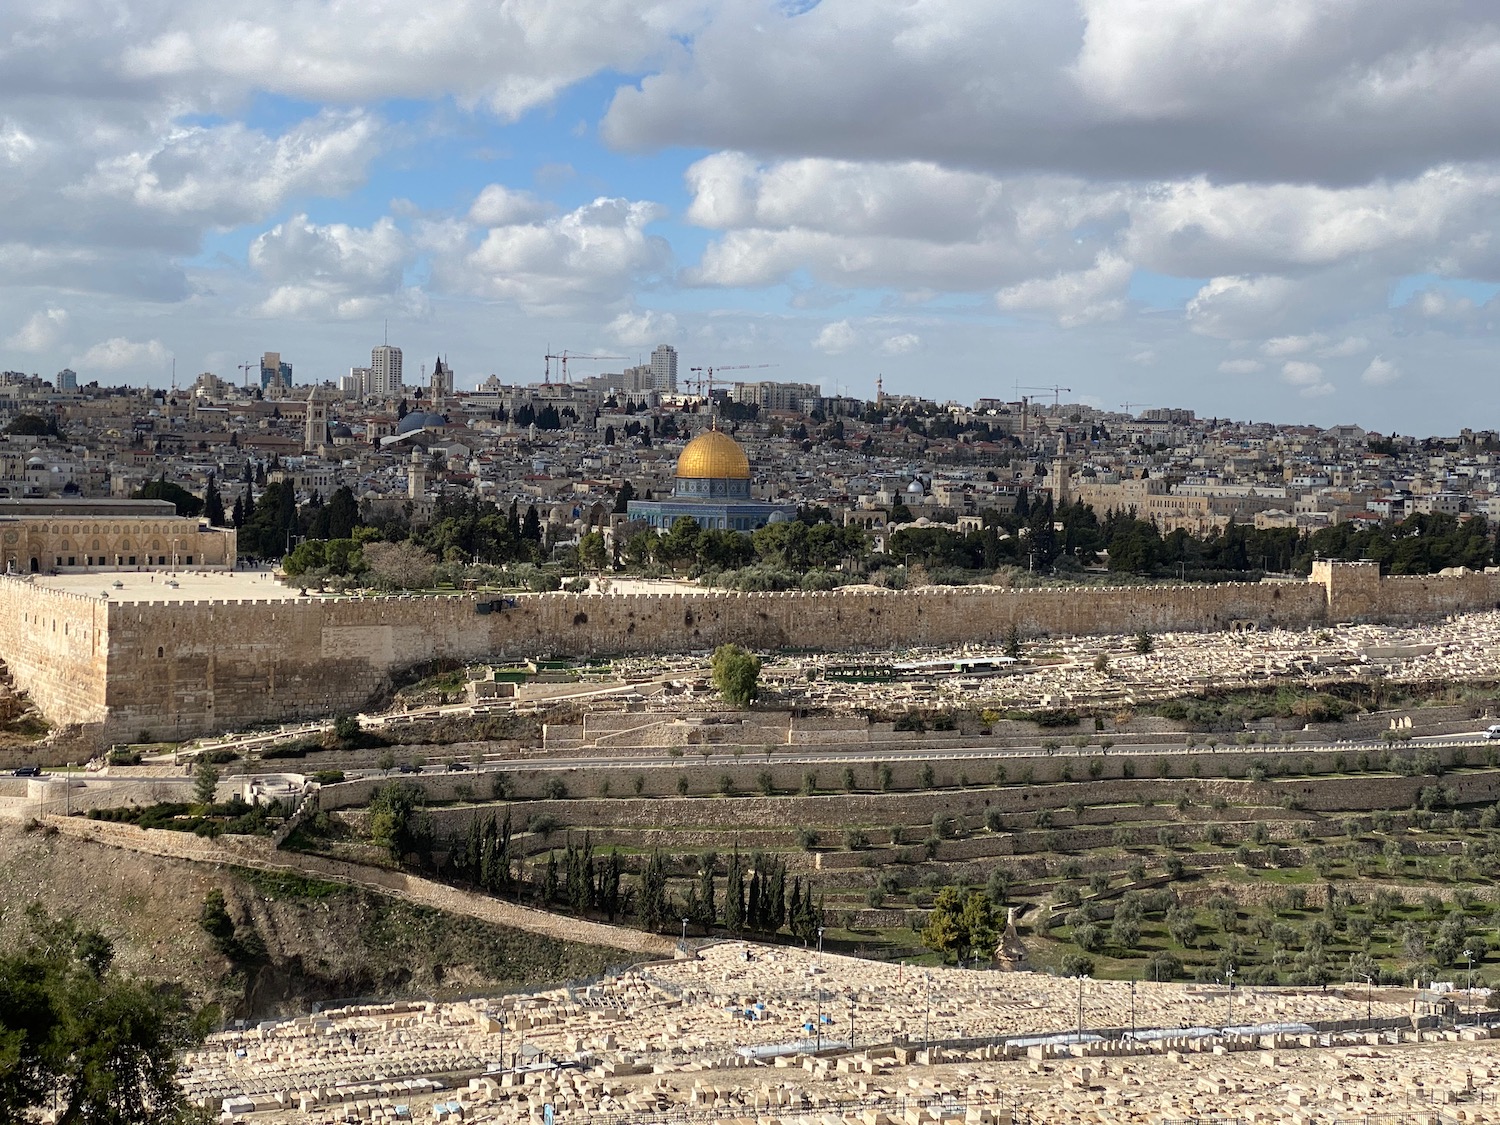 Mount of Olives landscape with a large stone wall and a large building